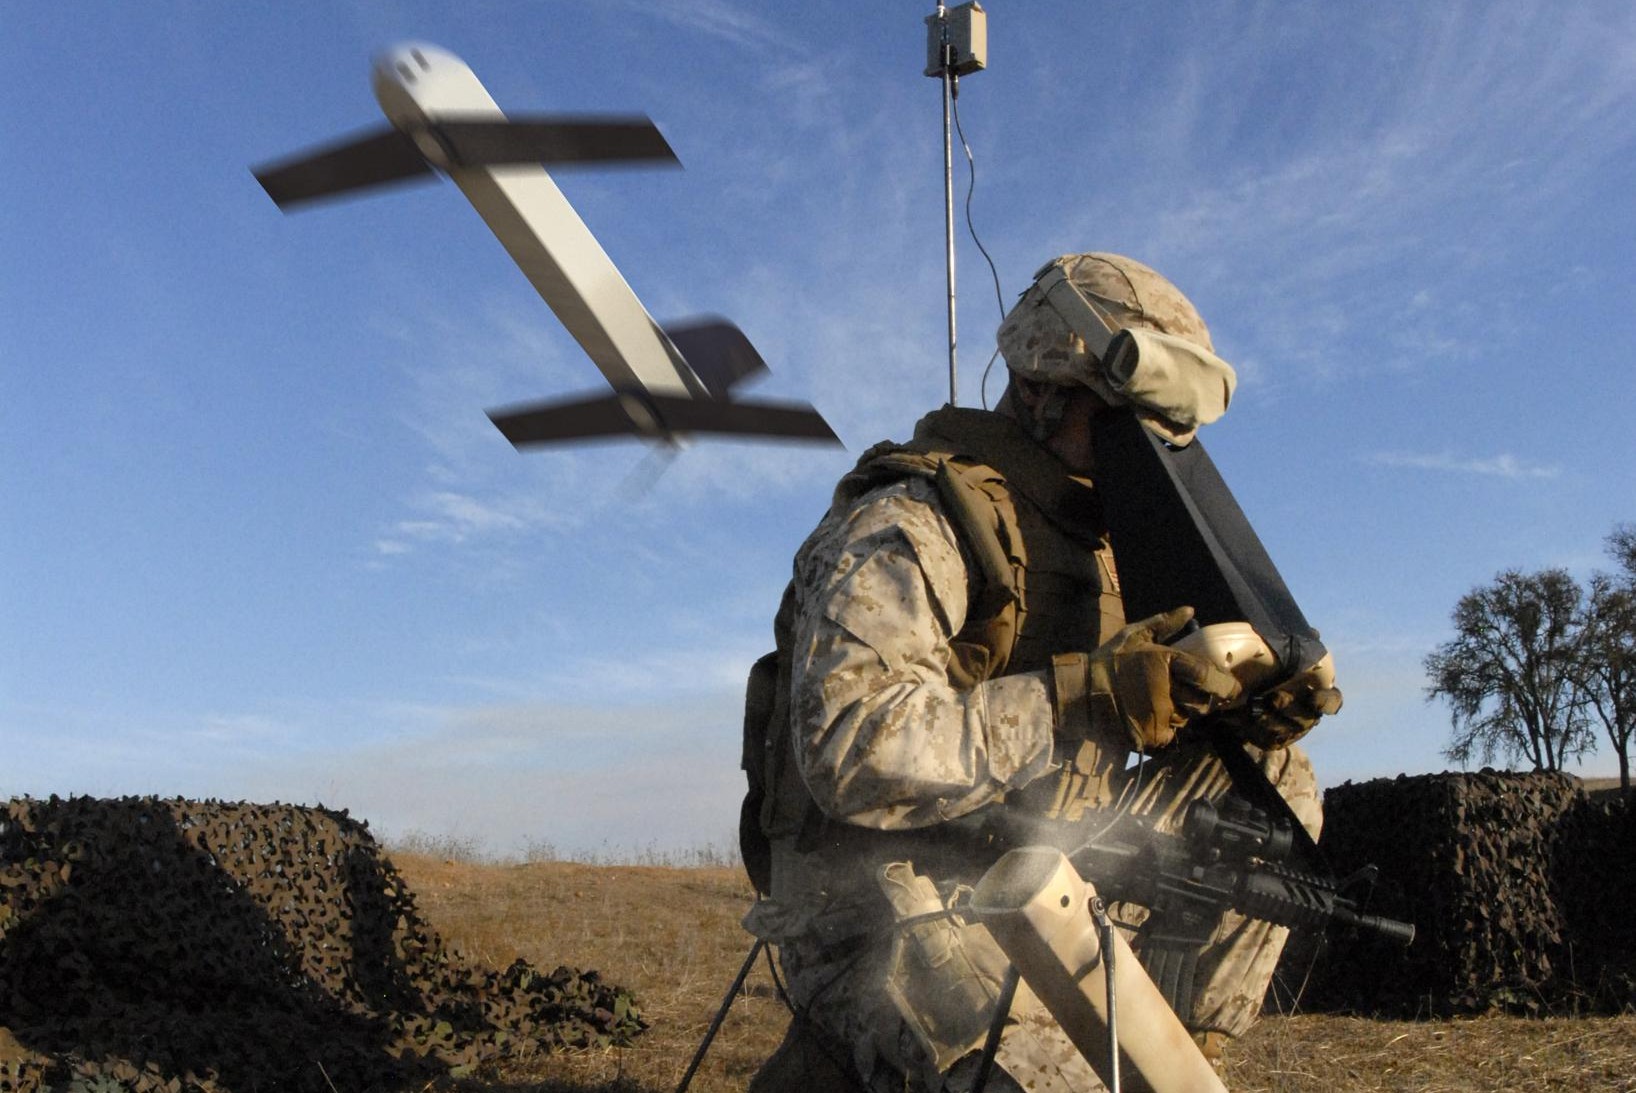 The United States is considering providing ‘comicase drones’ to Ukraine